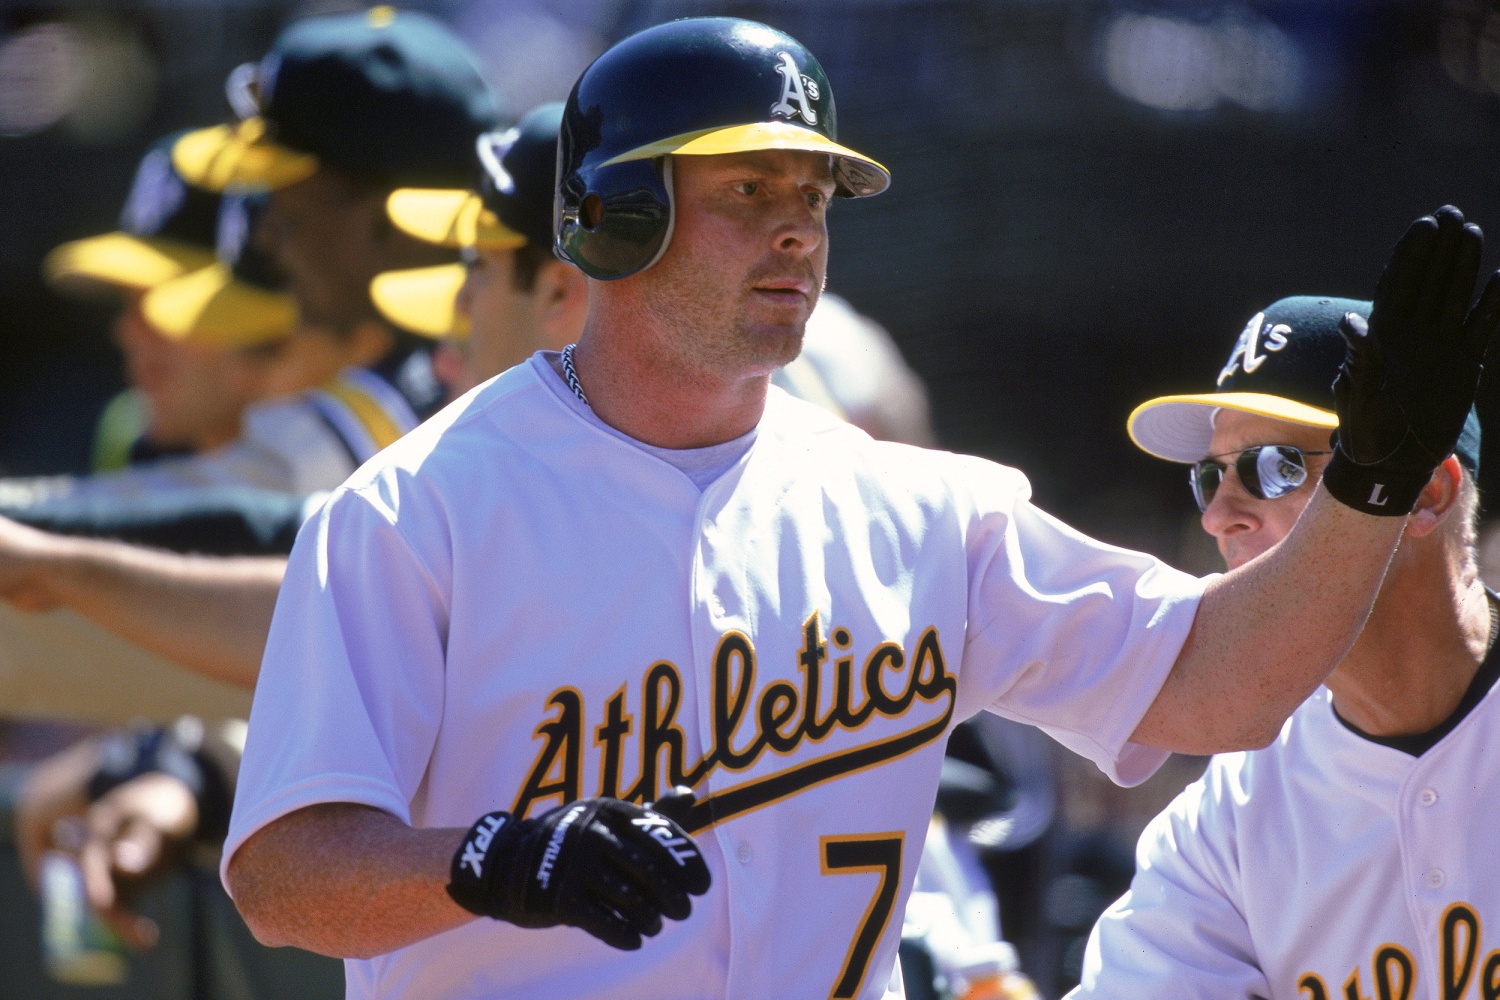 Former major leaguer Jeremy Giambi, 47, dies at parents' California home